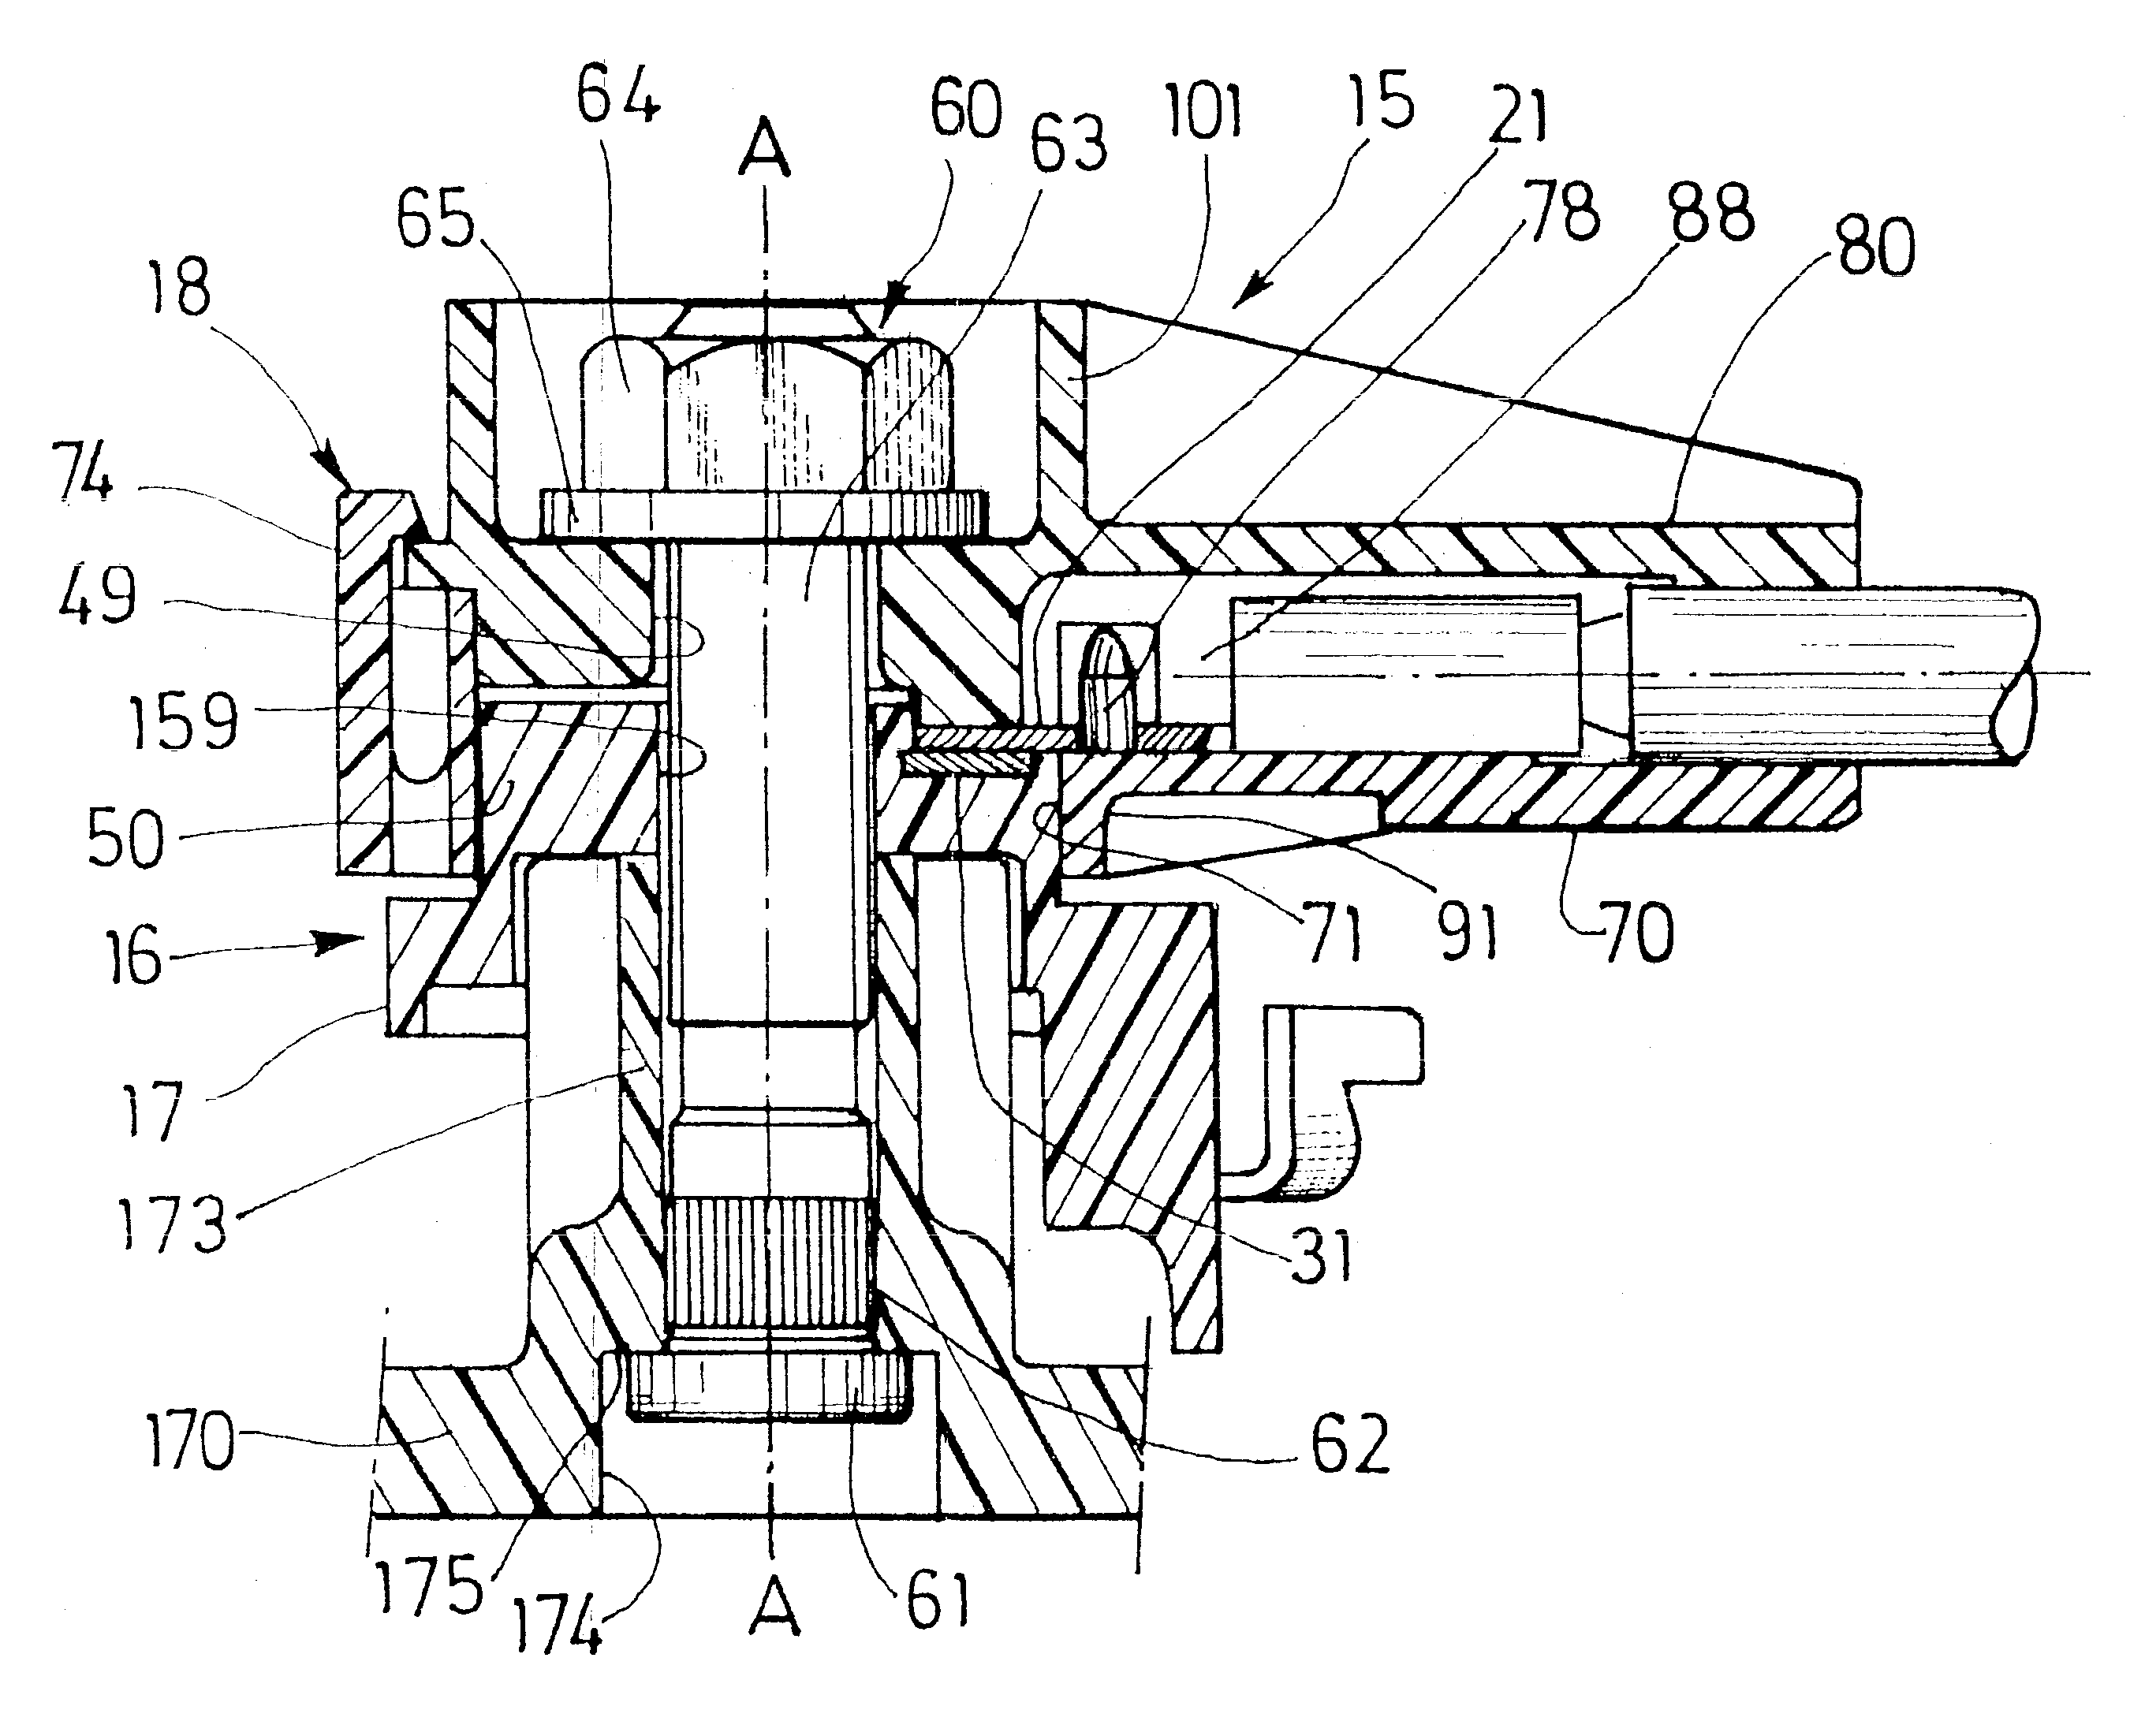 Multicontact electrical connector and rotating electrical machine bearing same